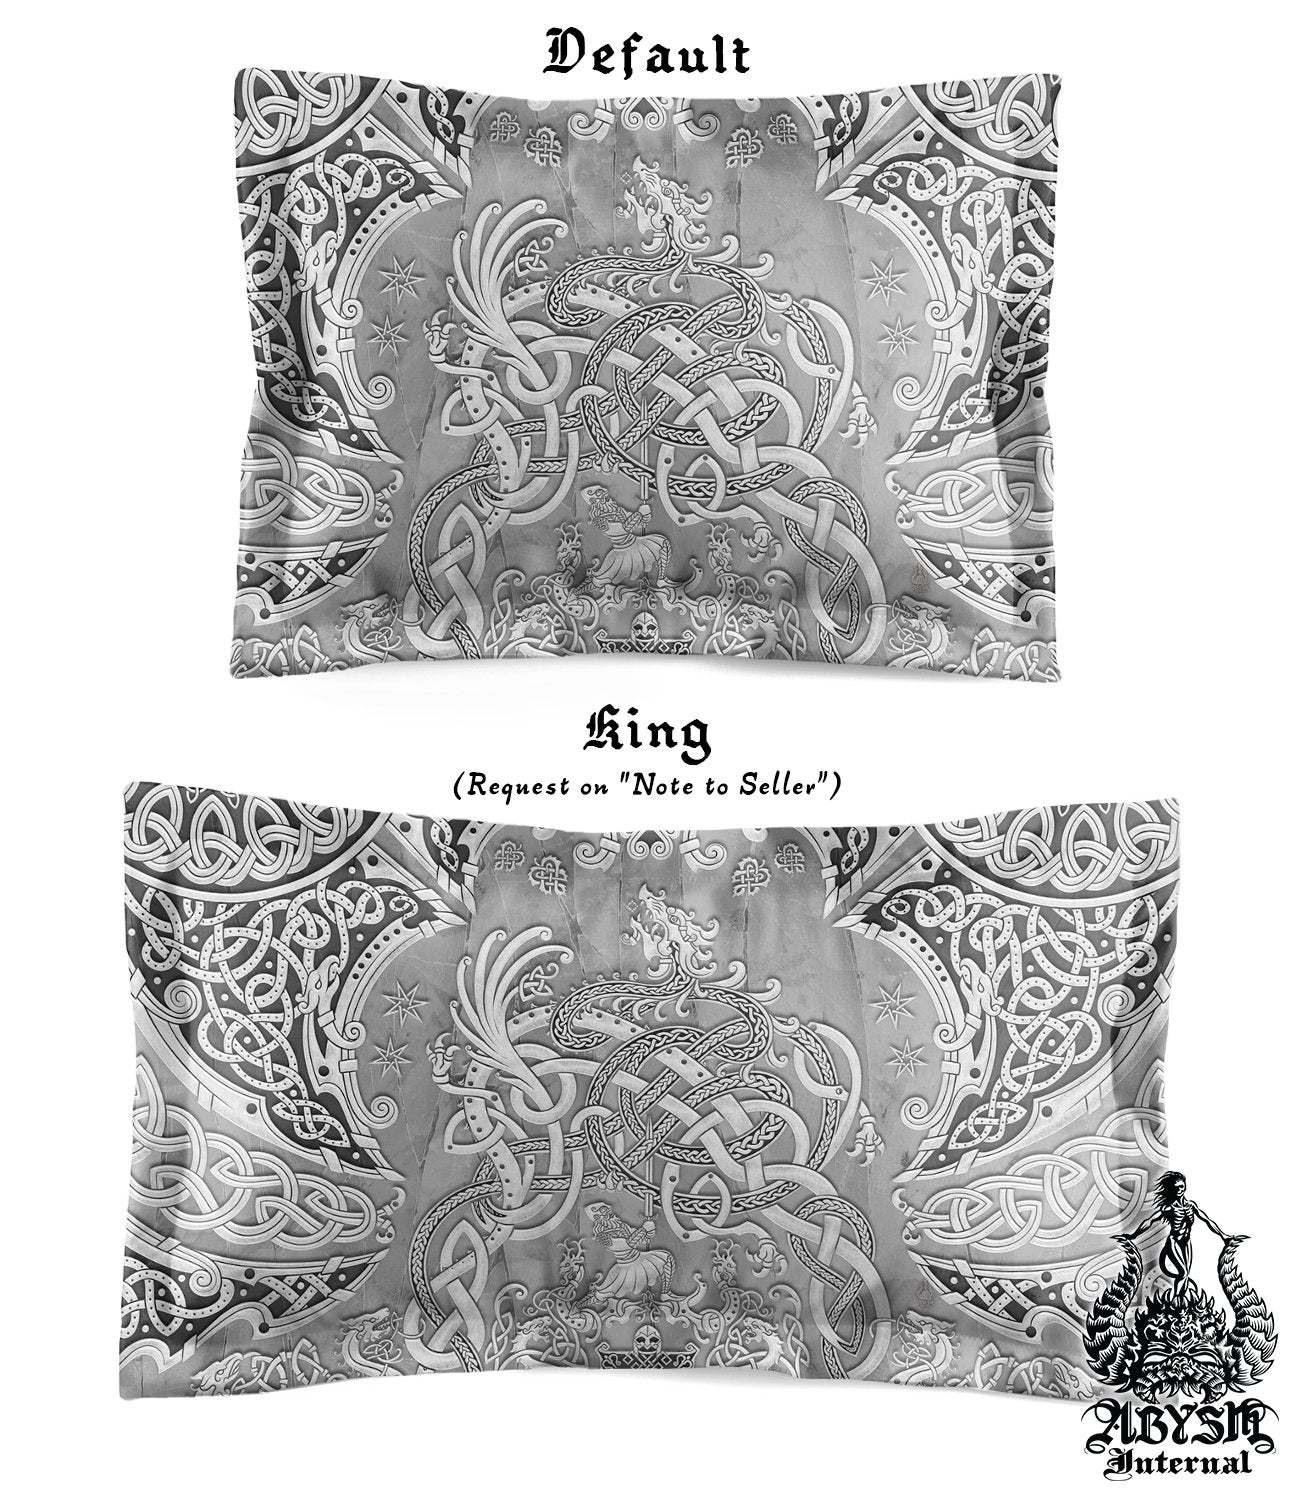 Viking Bedding Set, Comforter and Duvet, Norse Bed Cover and Bedroom Decor, Nordic Art, Sigurd kills Dragon Fafnir, King, Queen and Twin Size - Stone White - Abysm Internal